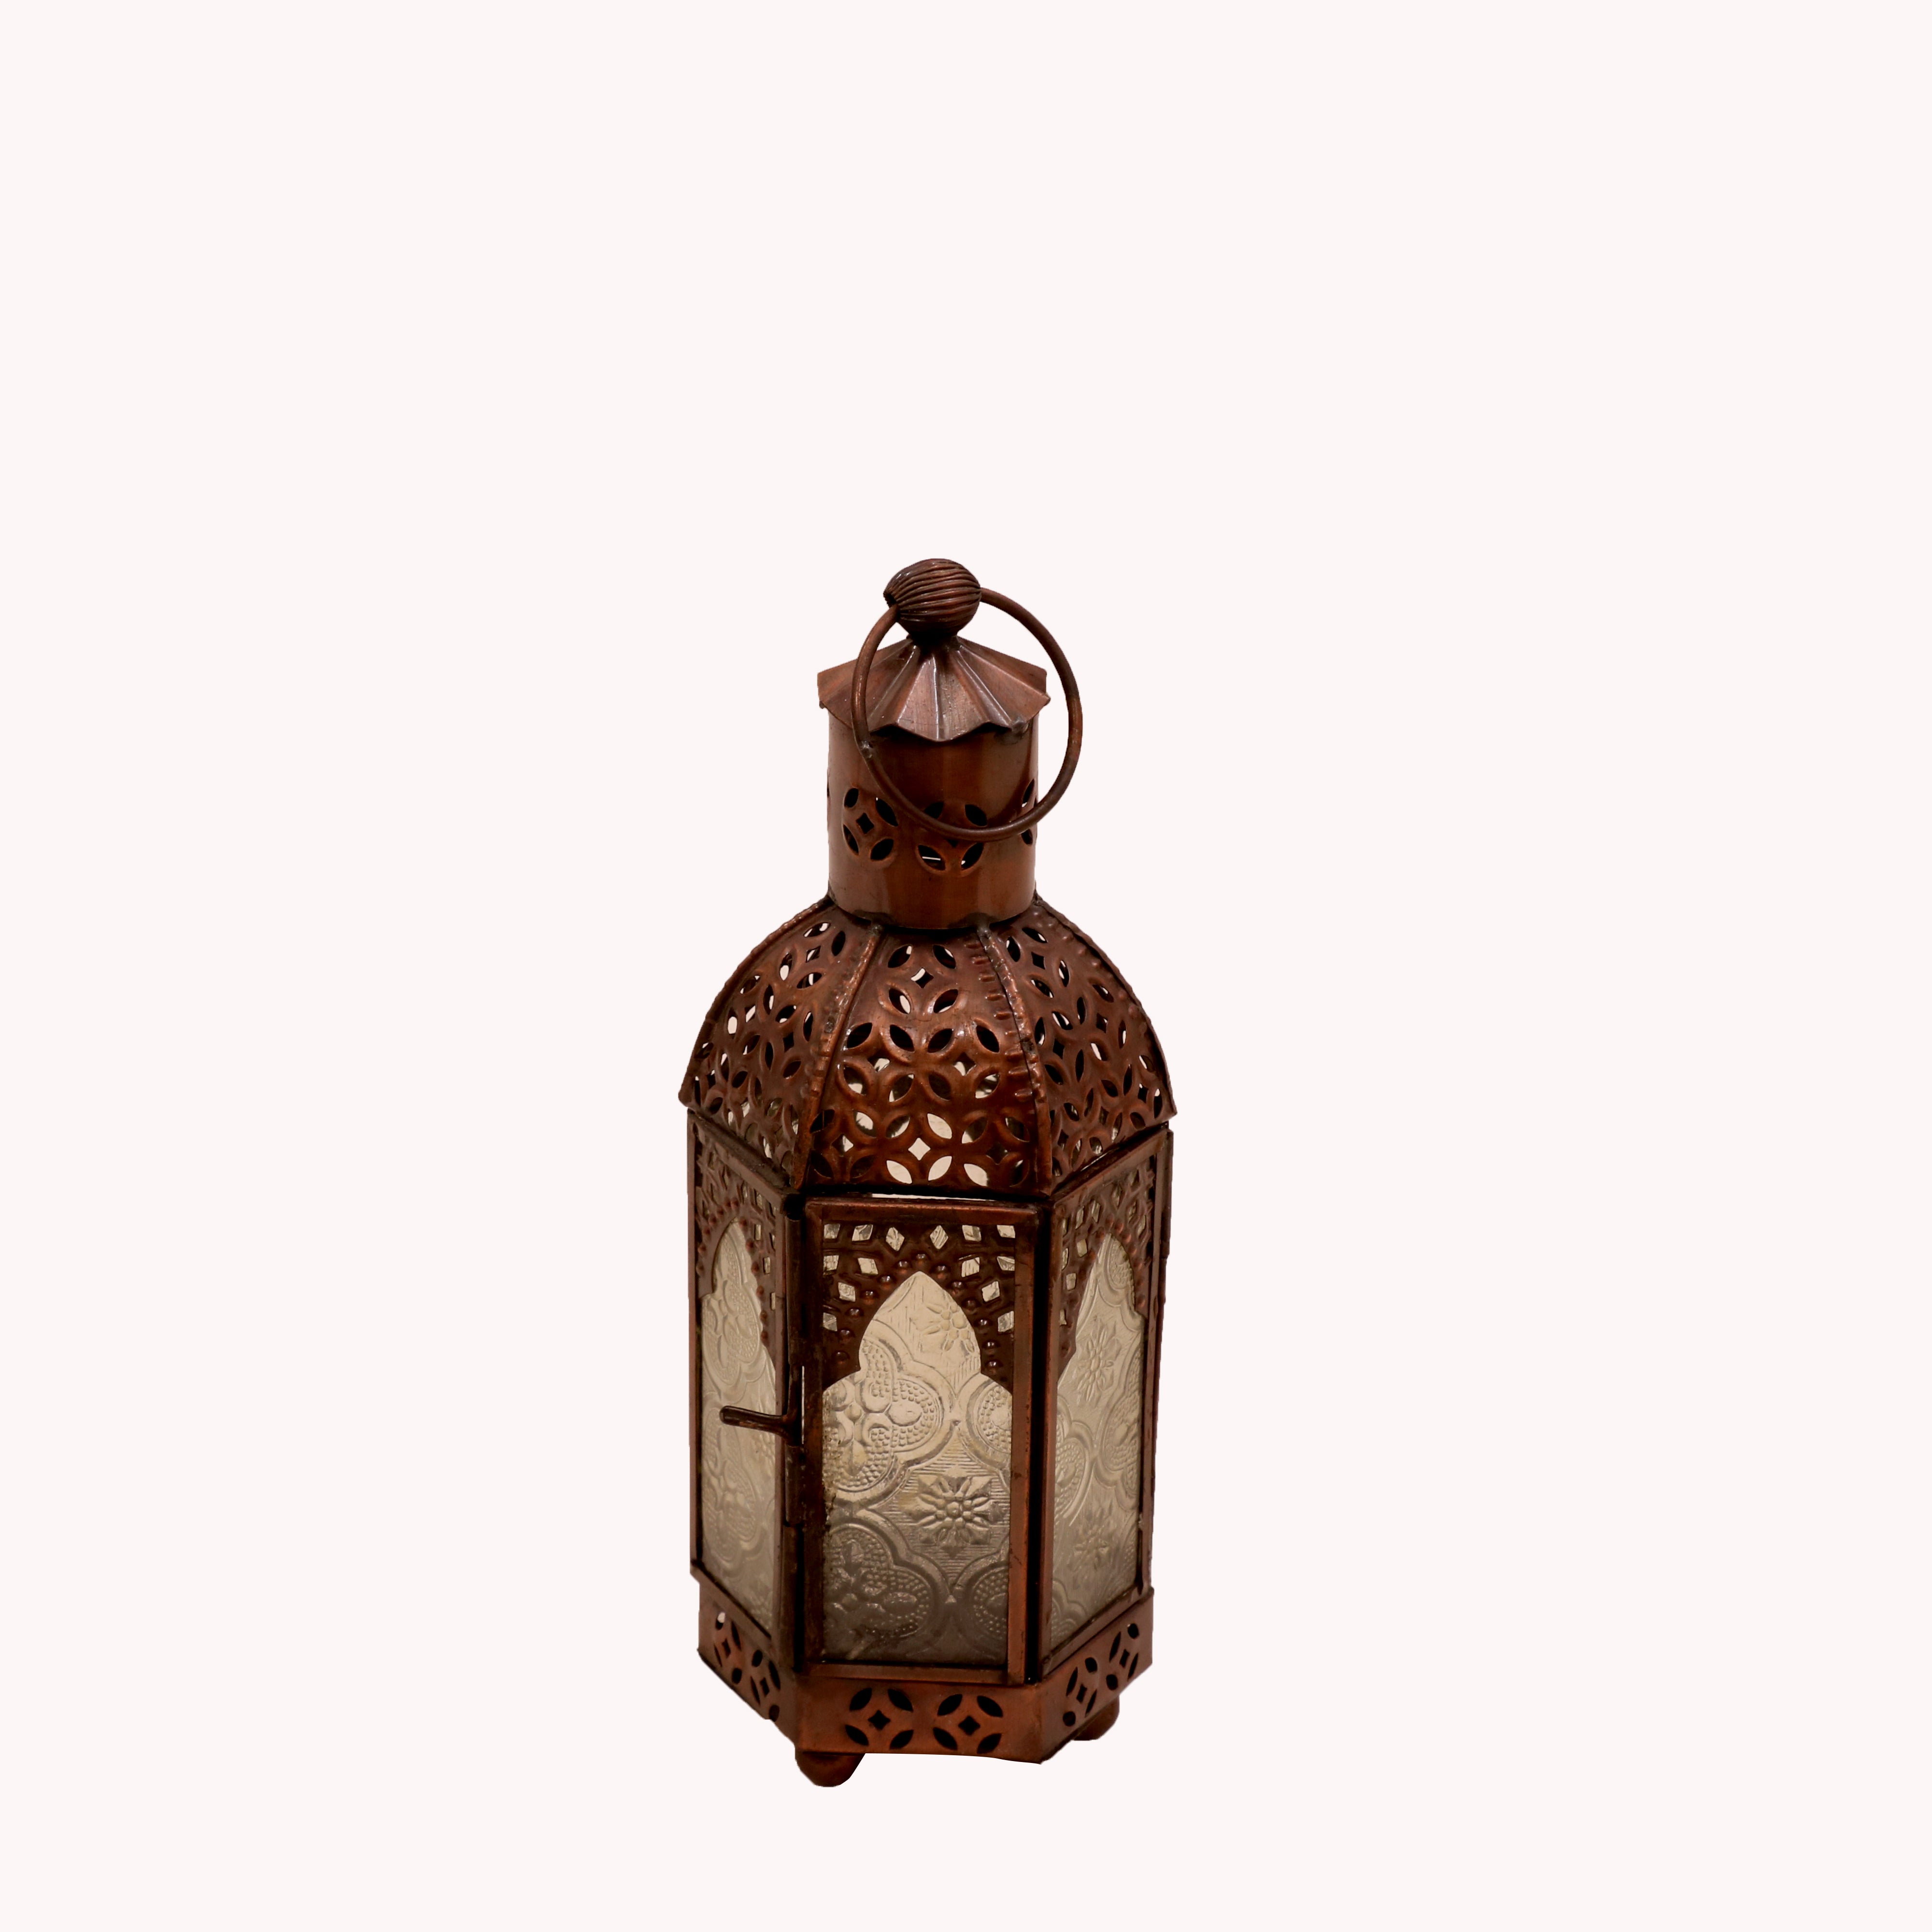 Intricate Lantern Candle Holder Candle Holder